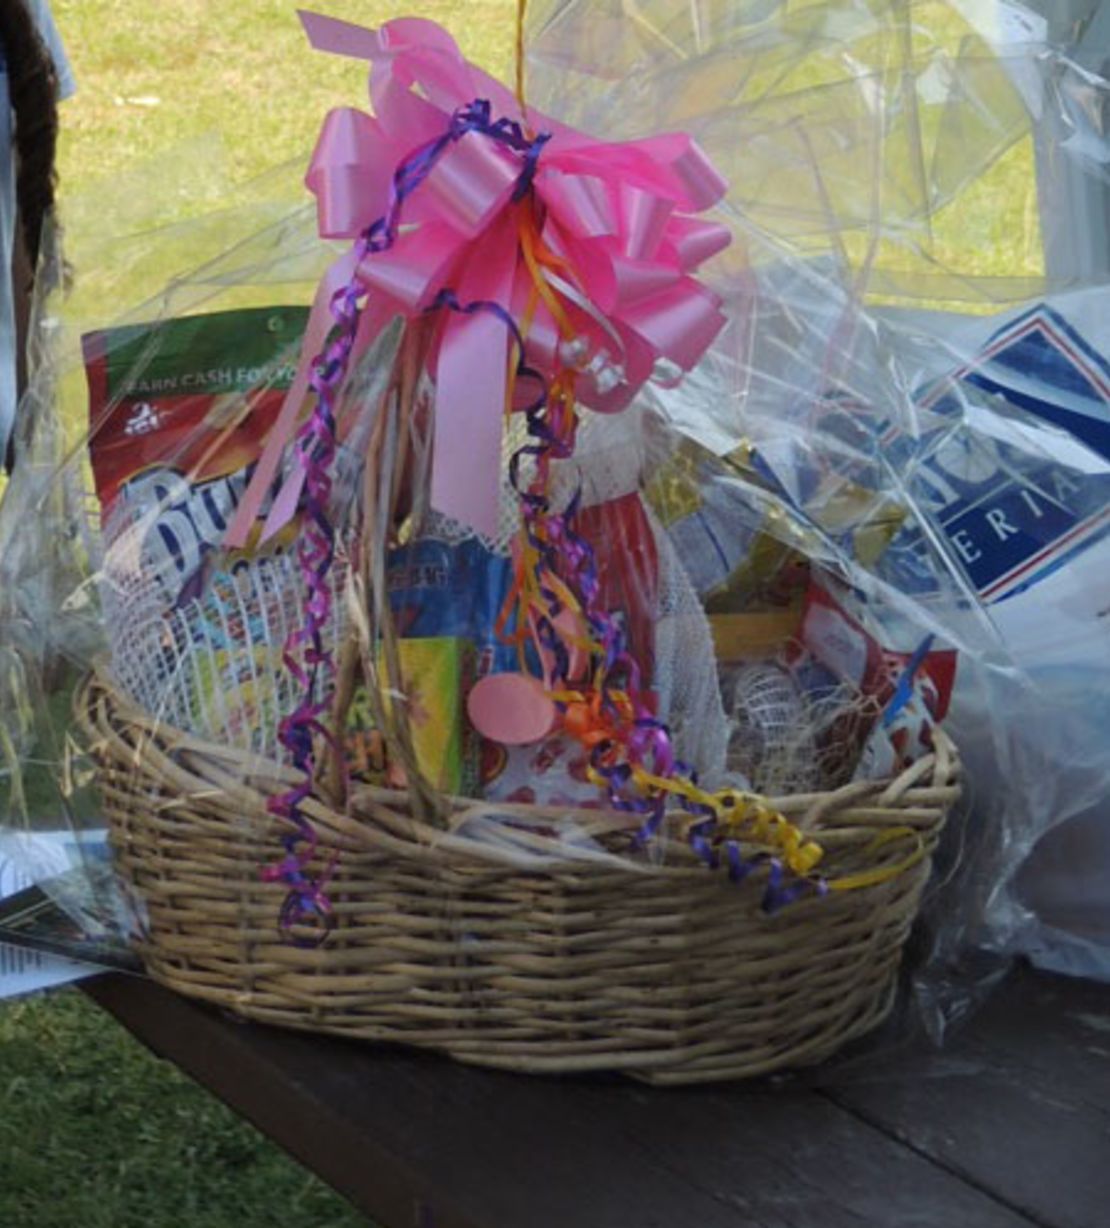 Sarah Maizes took this photo of one of the "massive" gift baskets she saw on visiting day.